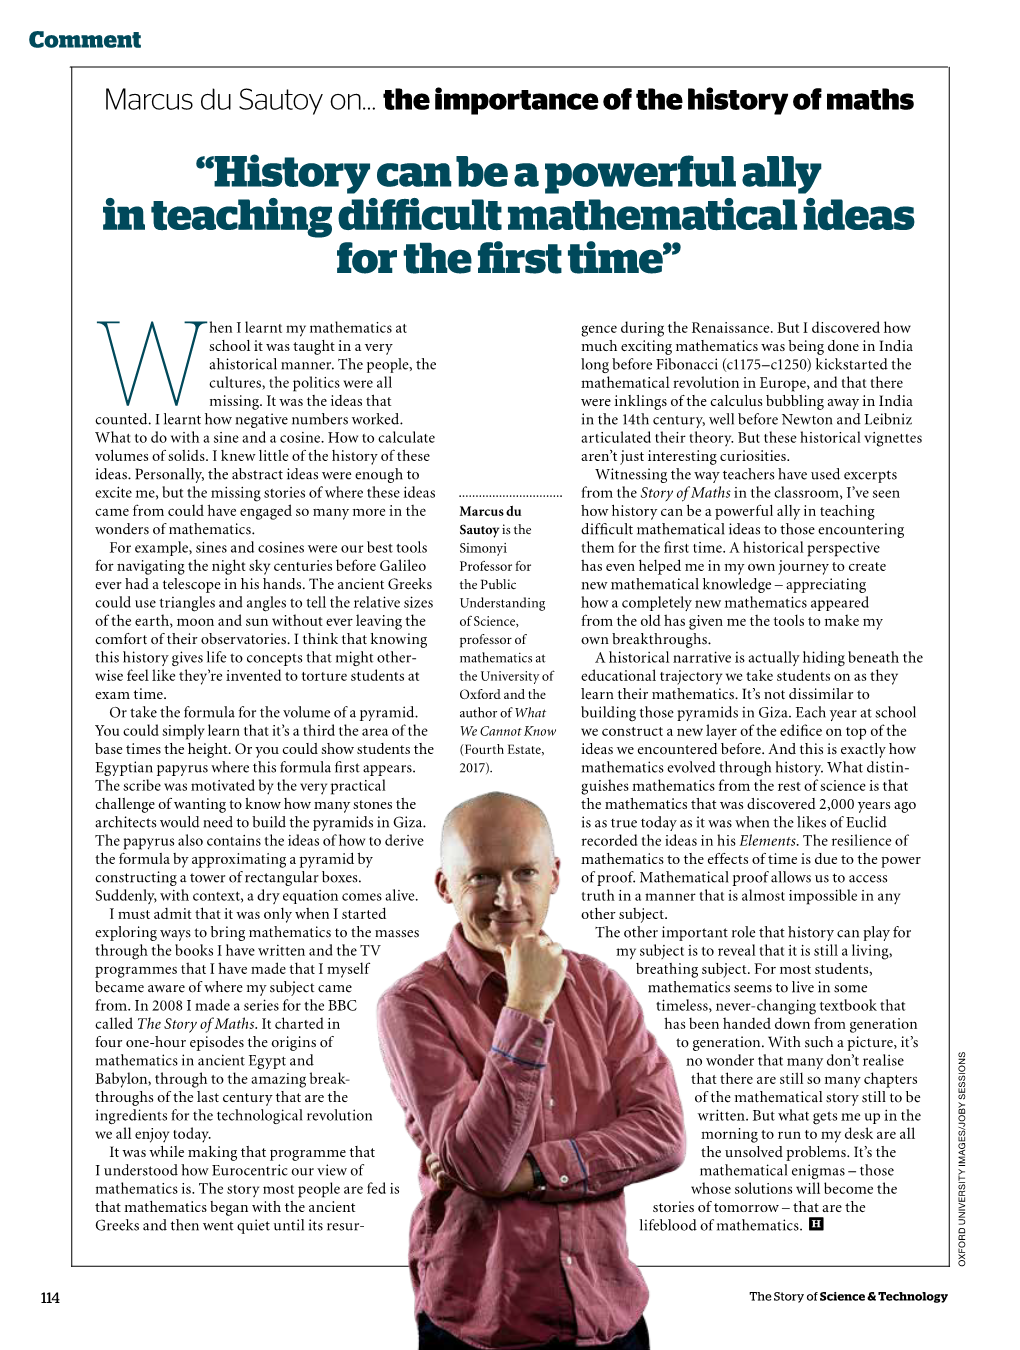 History Can Be a Powerful Ally in Teaching Difficult Mathematical Ideas for the First Time”